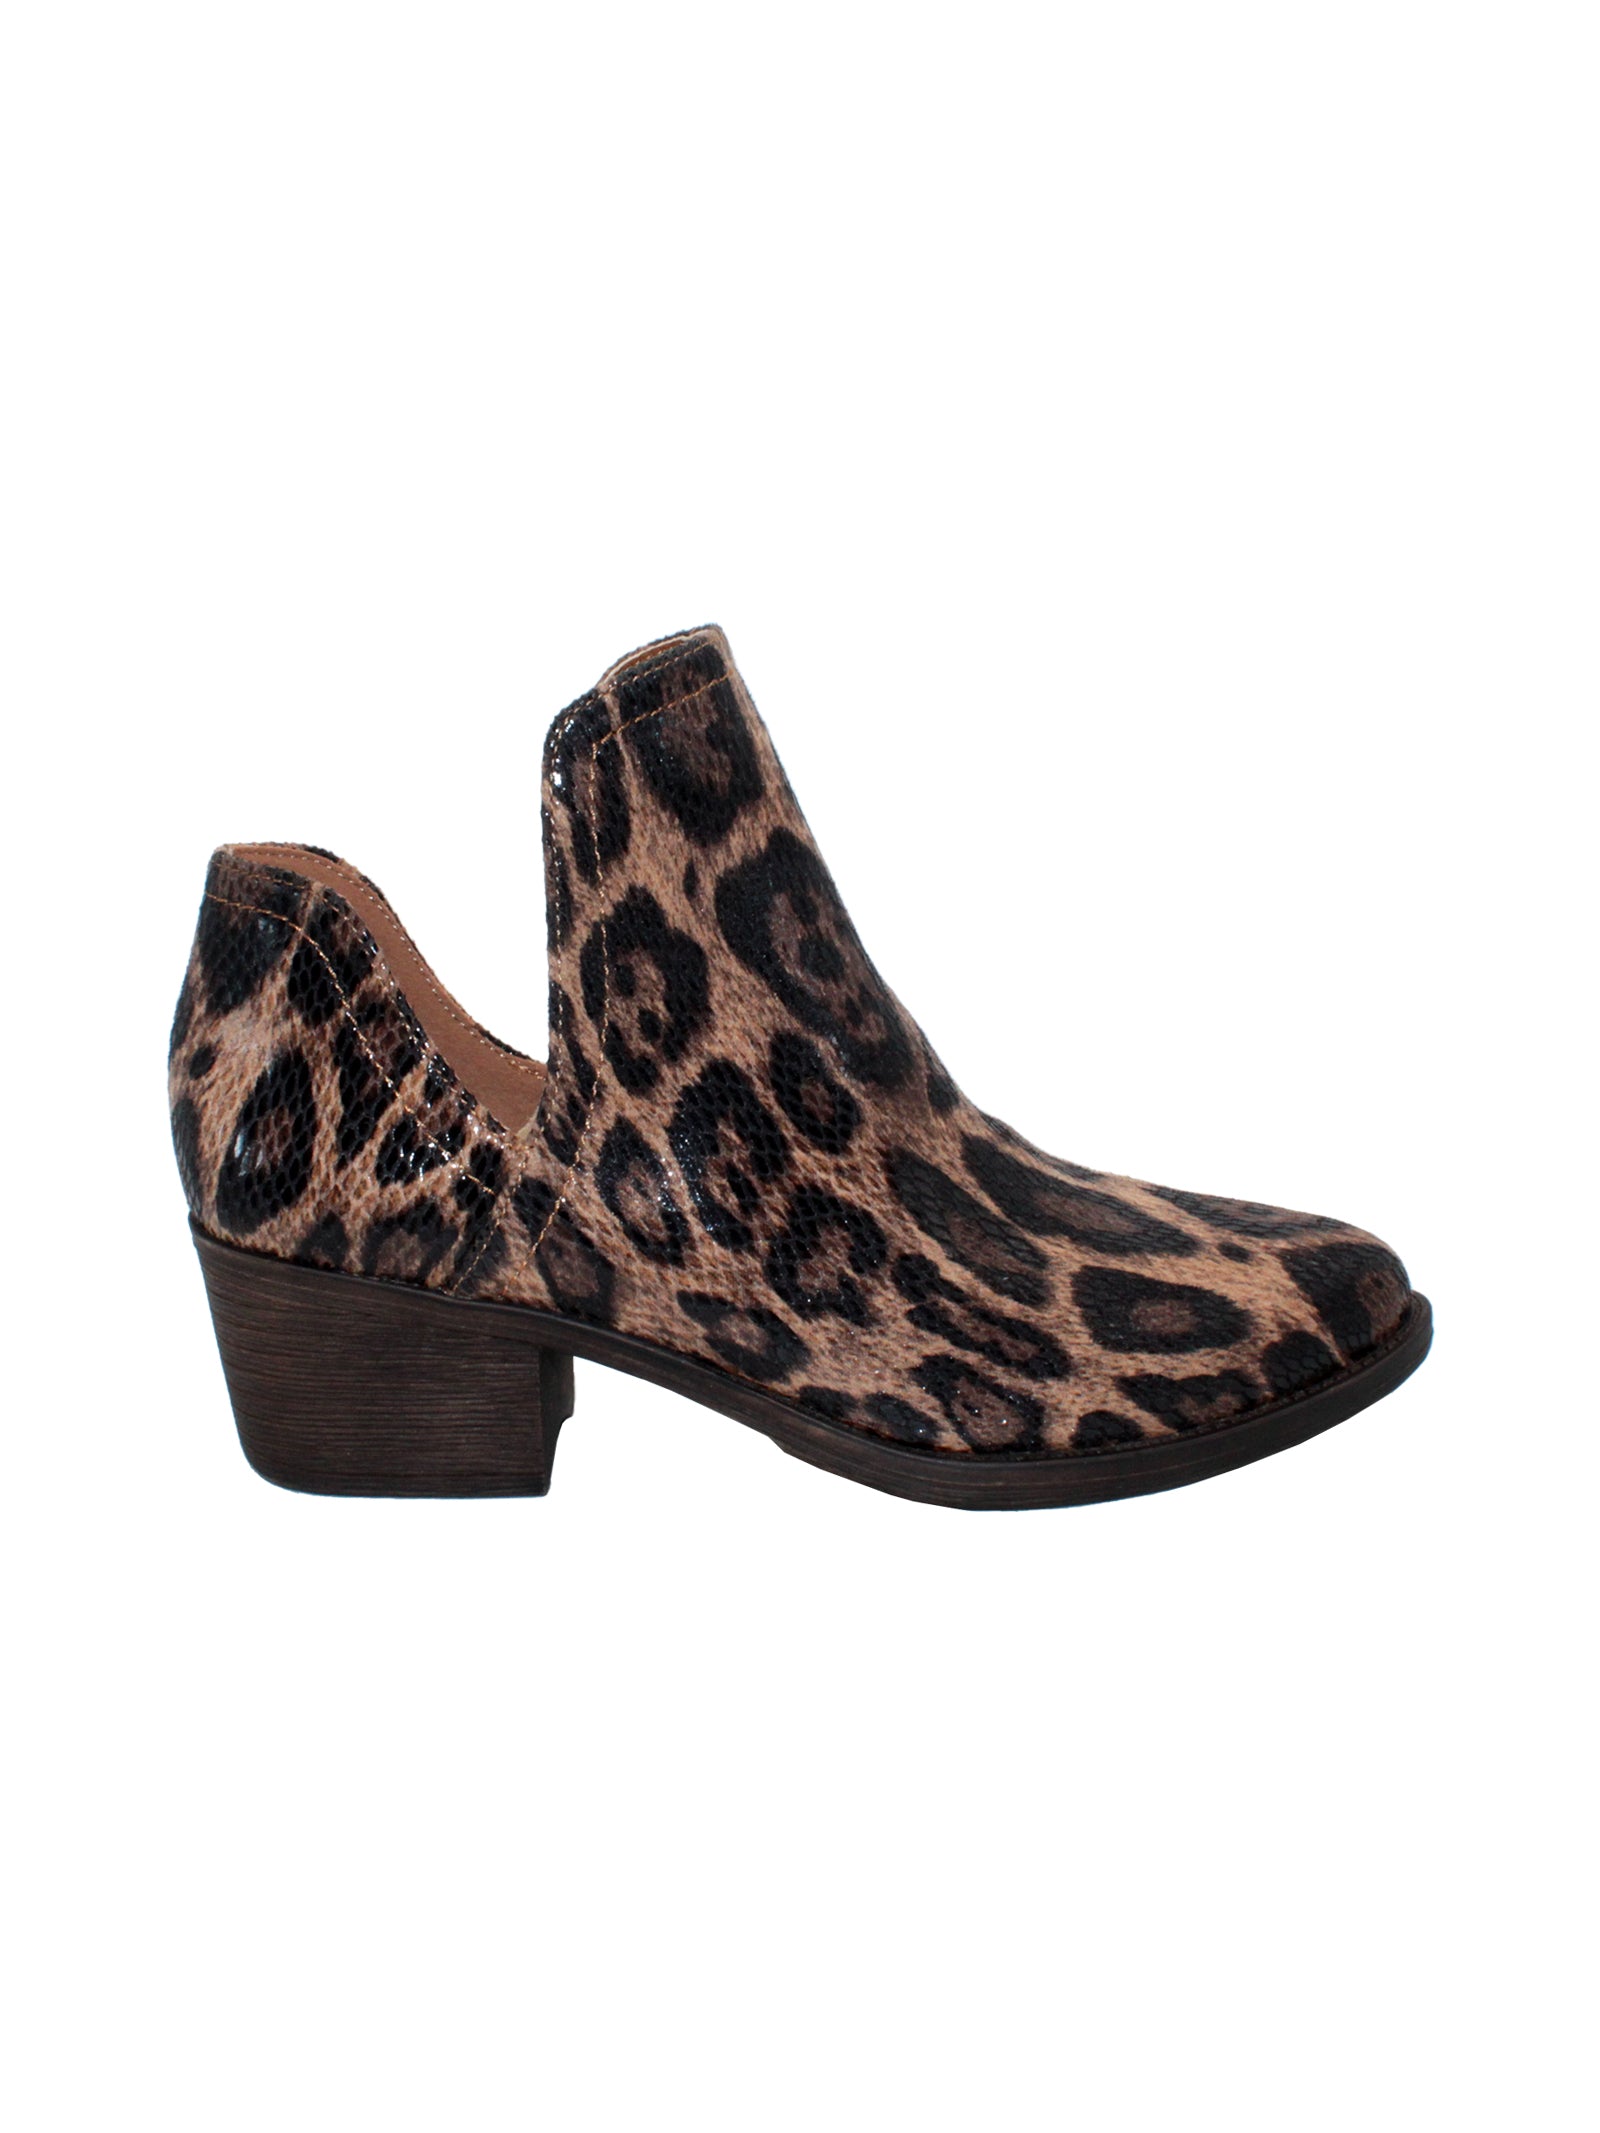 Our fan favorite leopard CHRONICLE bootie by Volatile has been crafted in exotic materials, embossed faux croco or multicolored faux snake, for the new fall season. The upper features an attractive open shank that complement dresses and jeans alike.  side